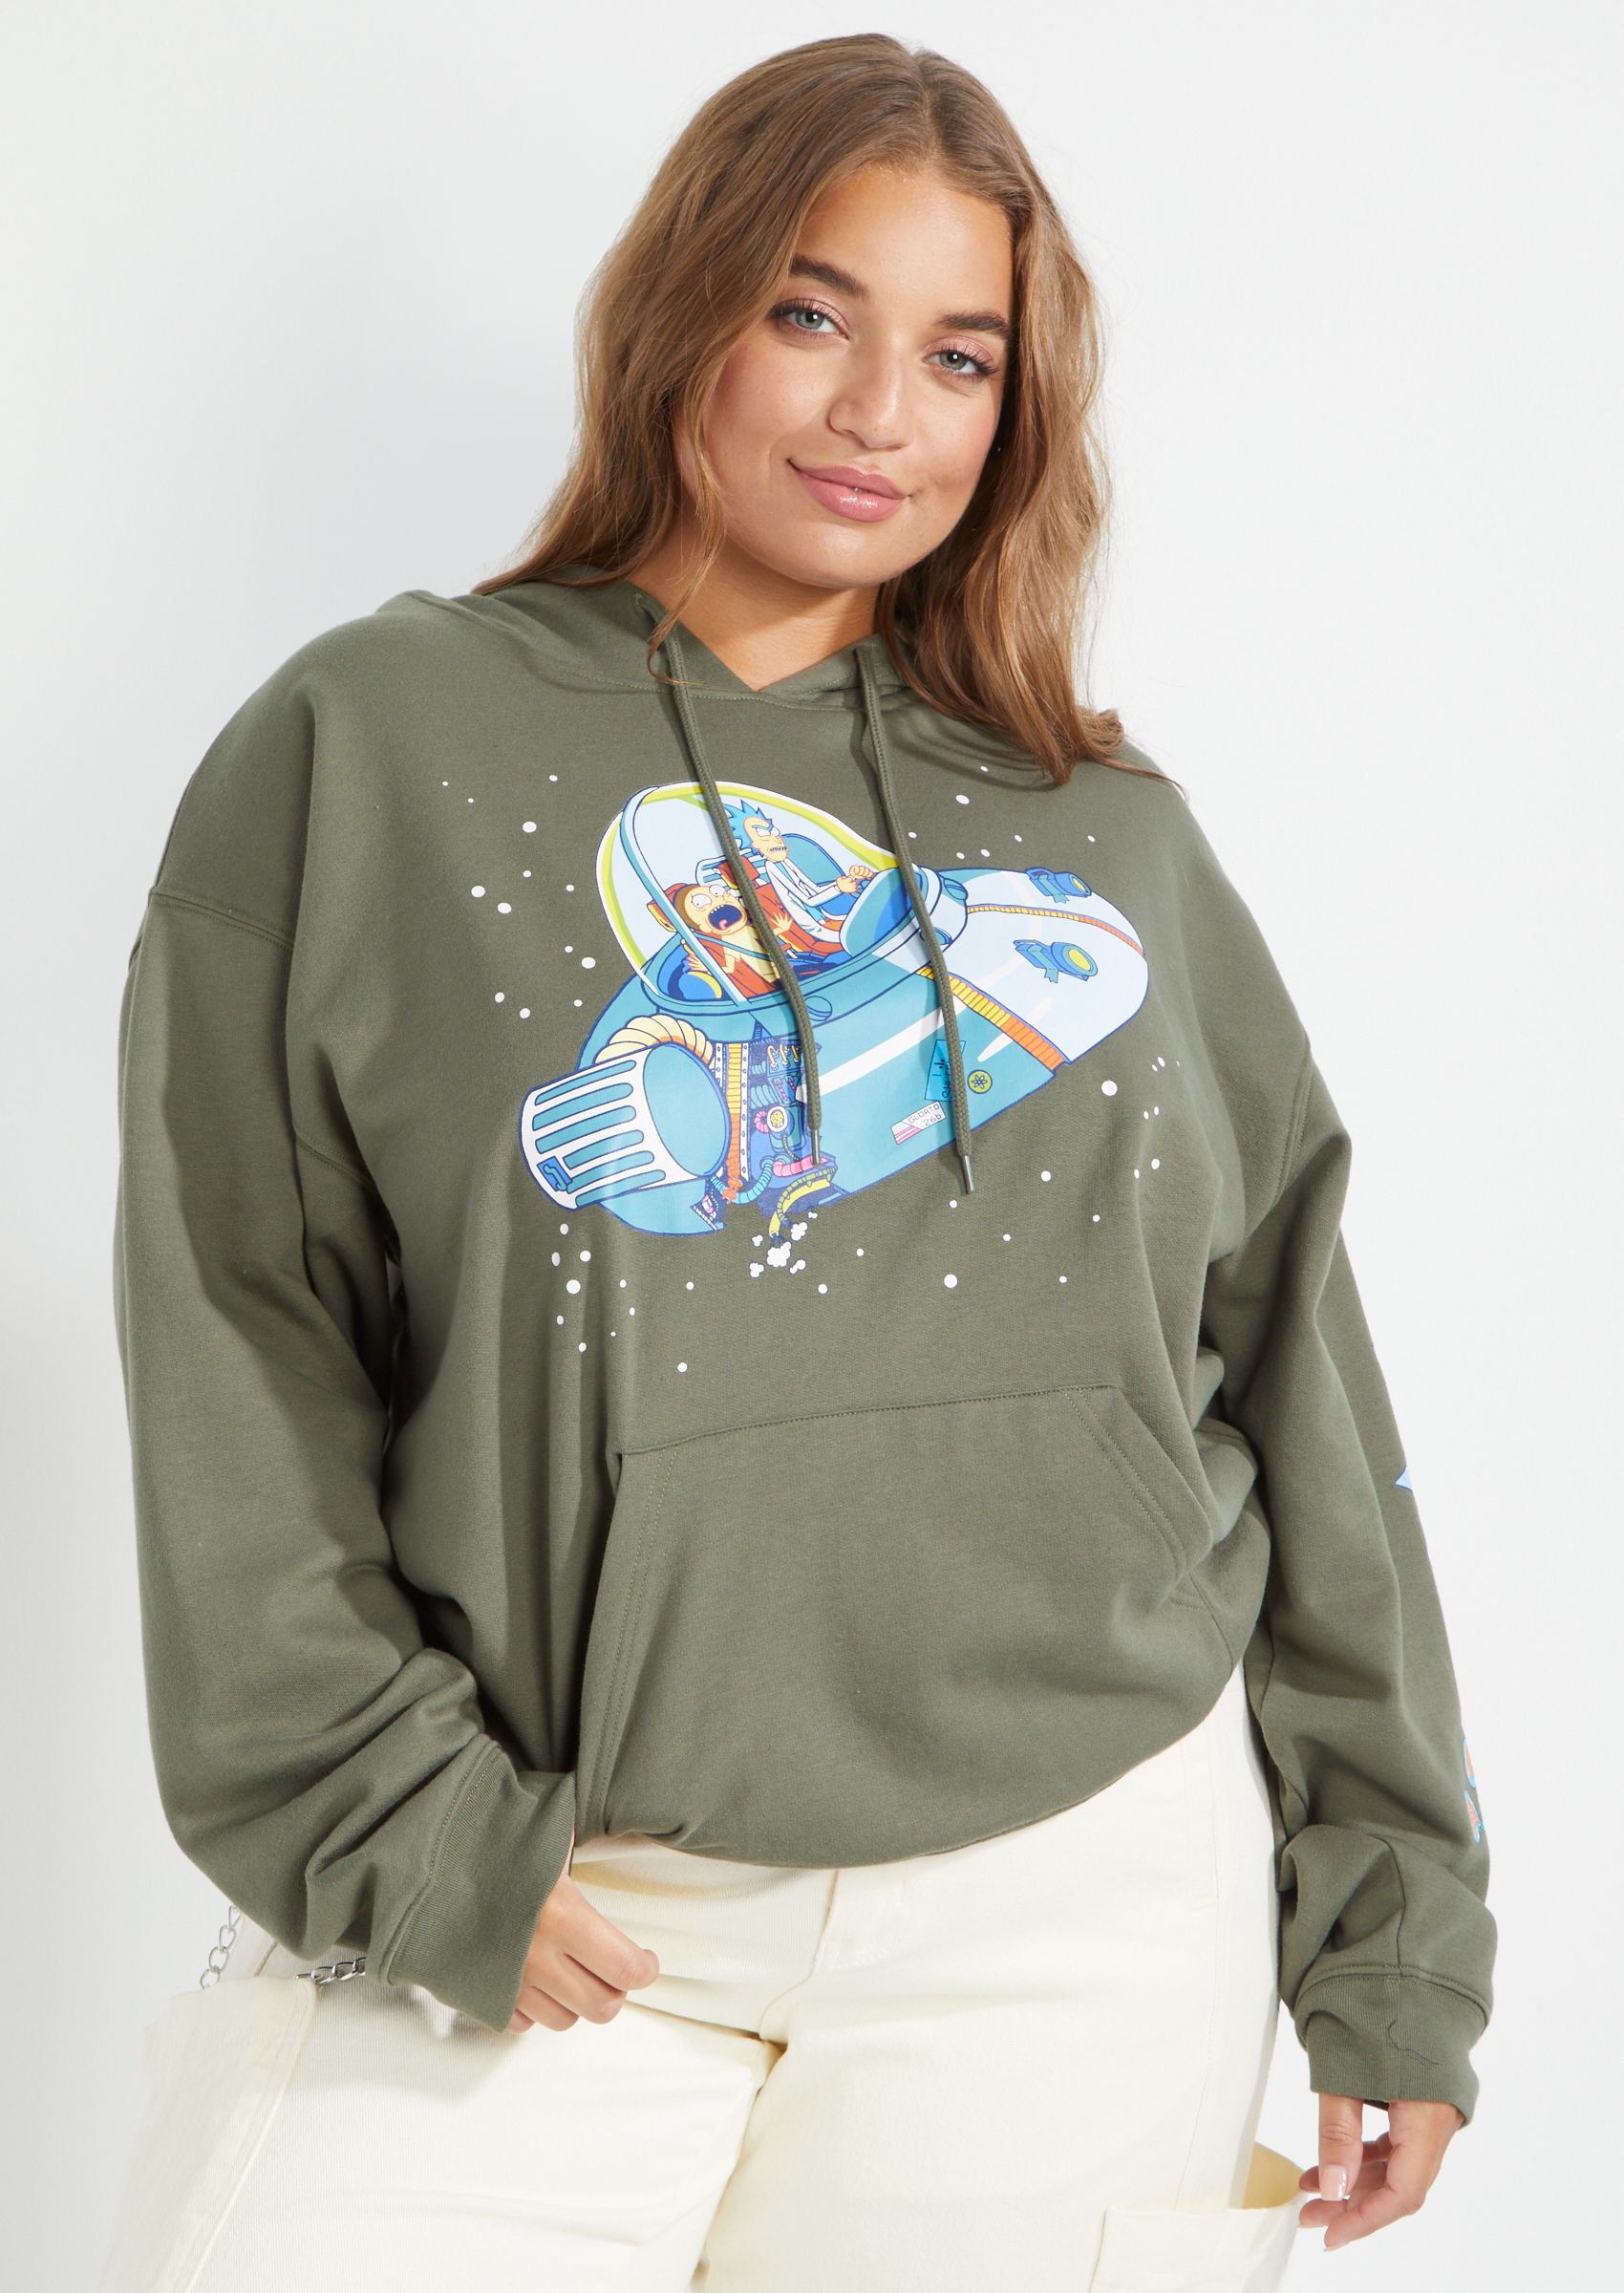 Rue21 Plus Rick and Morty Spaceship Graphic Hoodie for Women, Size: 2X, Solid Screen